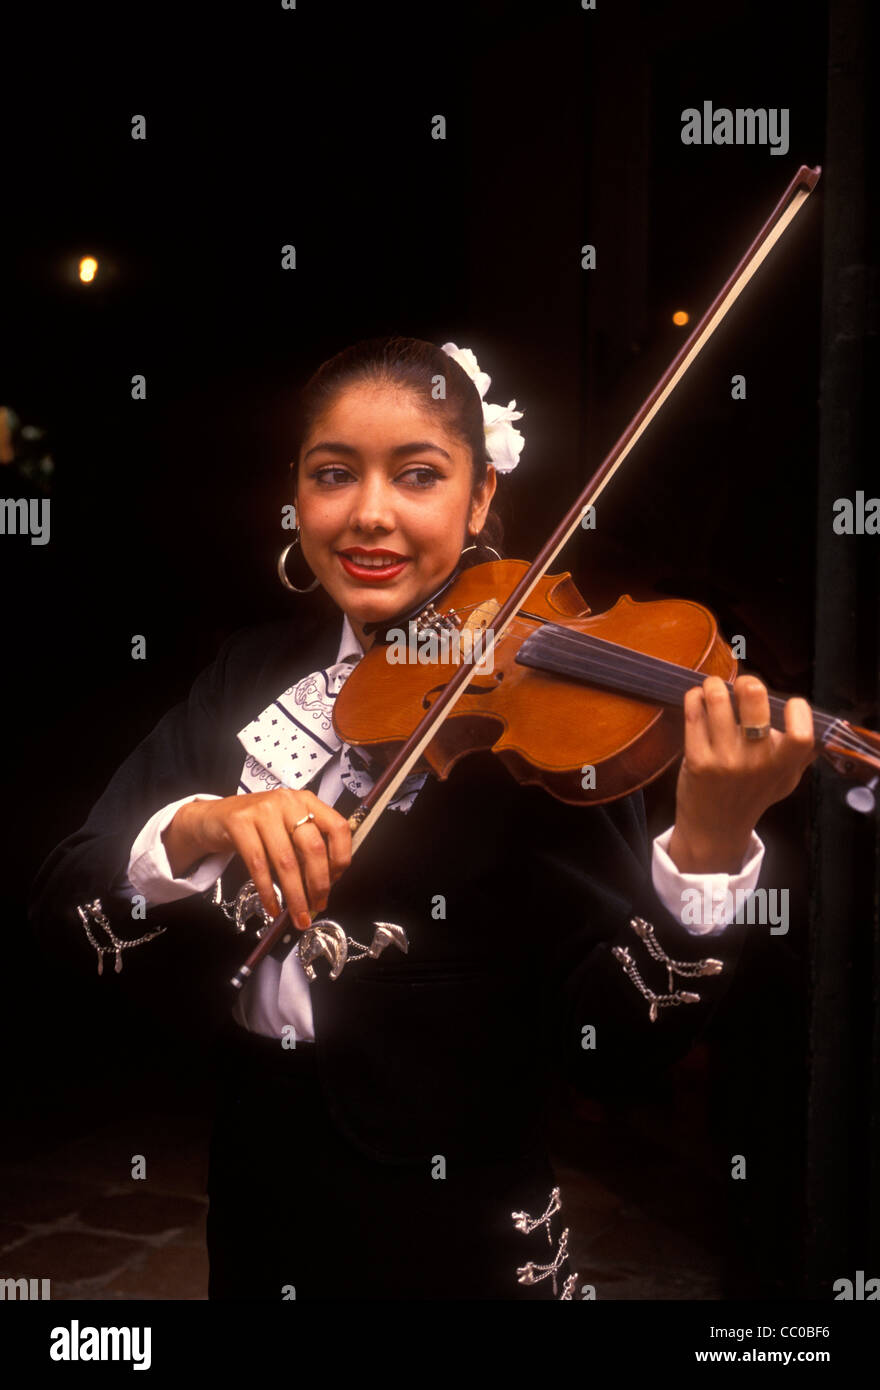 1, one, Mexican woman, Mexican, woman, violinist, playing violin, violin, violin player, musician, mariachi band, Tlaquepaque, Jalisco State, Mexico Stock Photo